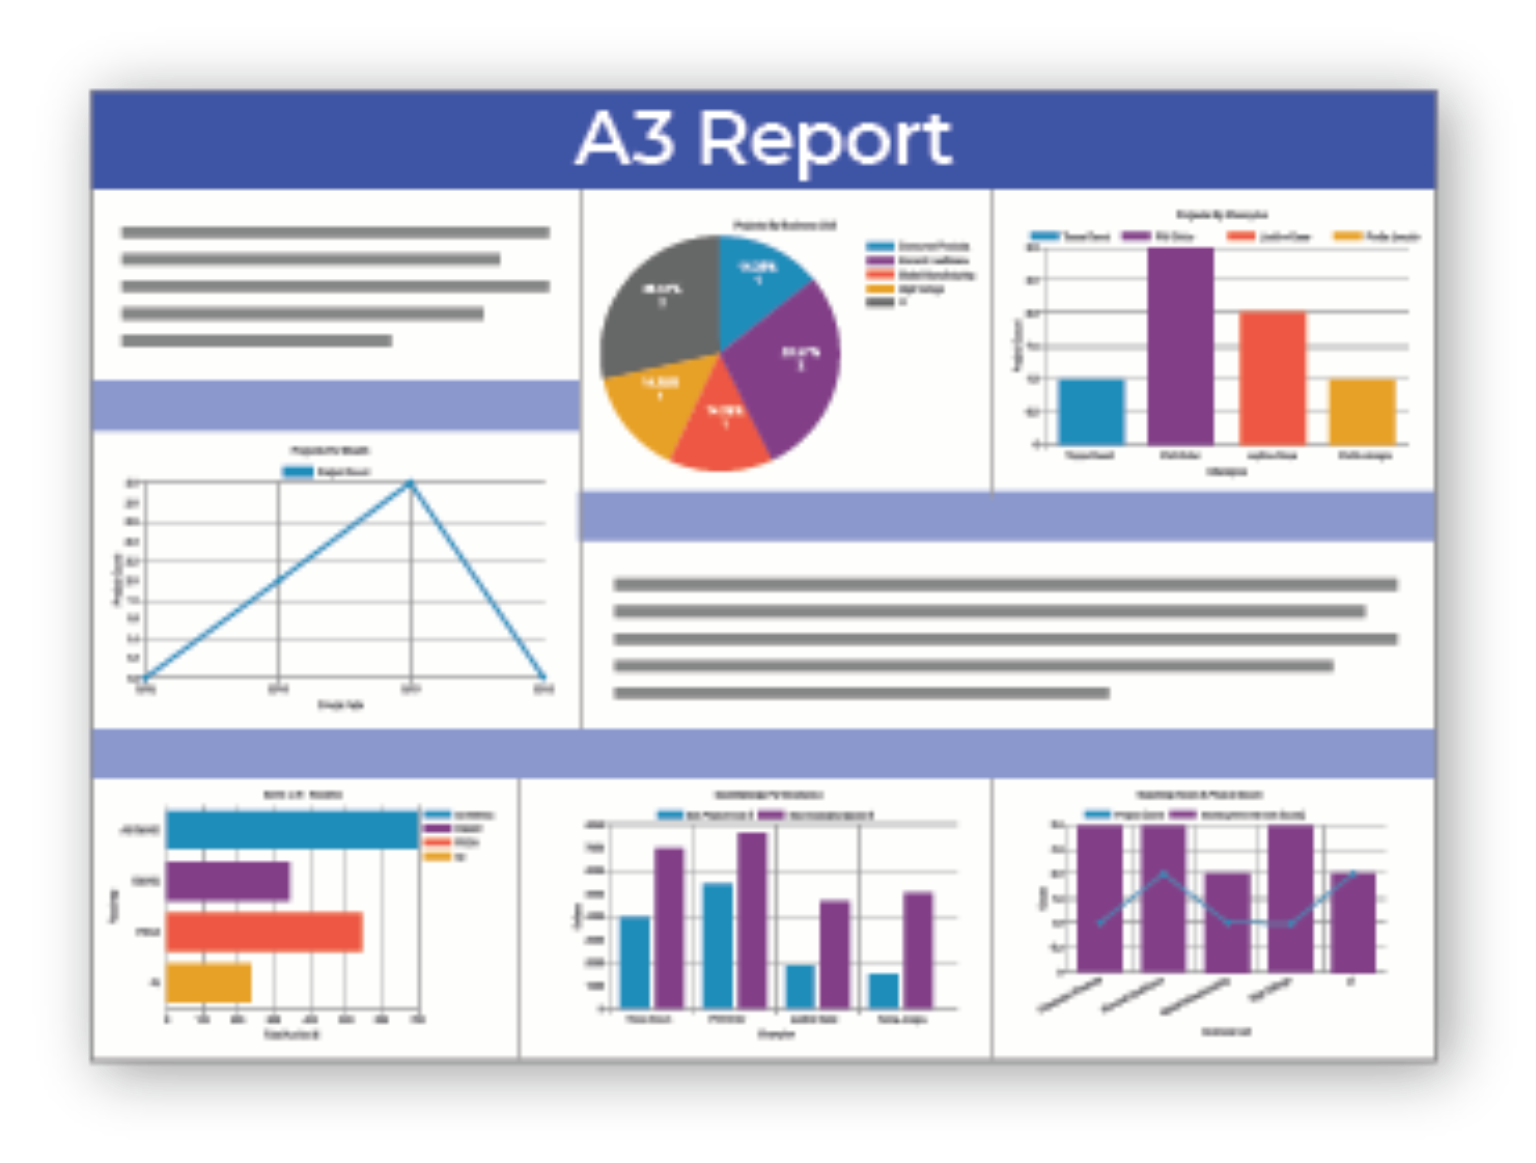 An example of an A3 report featuring graphs and charts showing visual management.